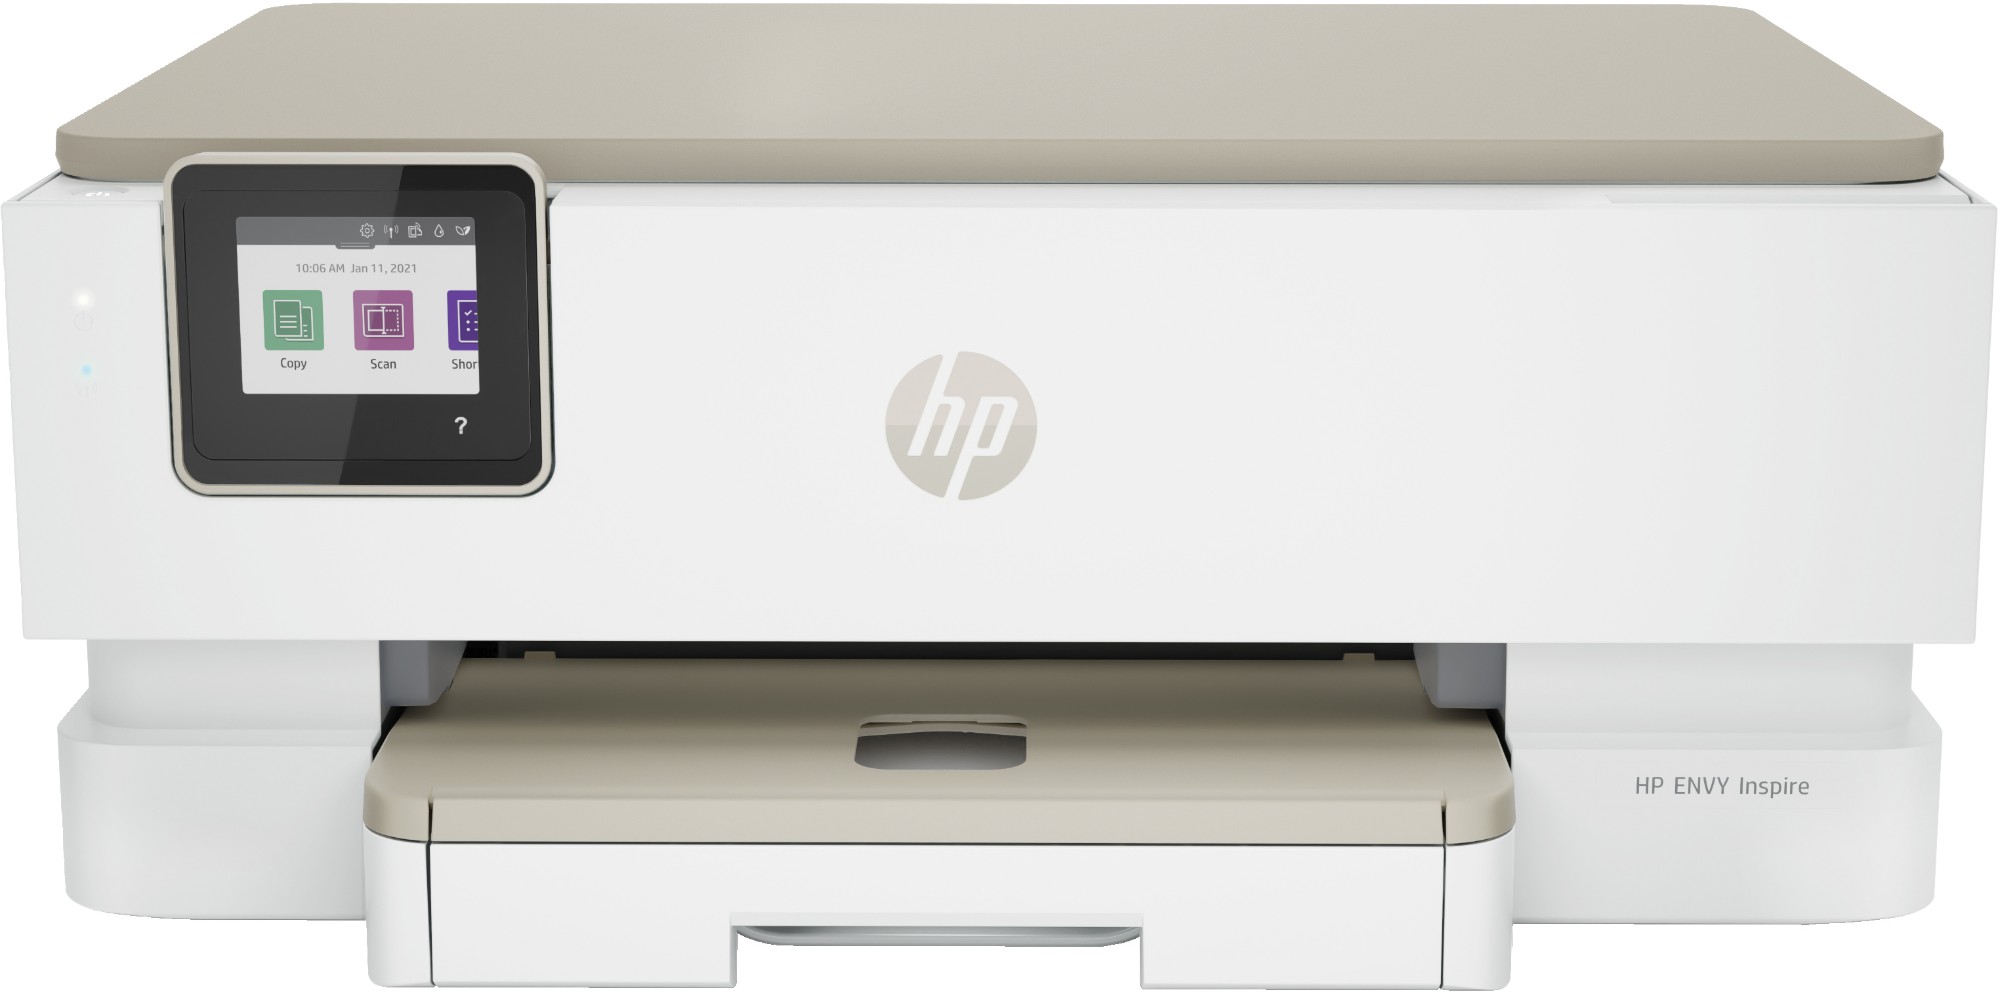 hp envy hp inspire 7220e all-in-one printer, color, printer for home,